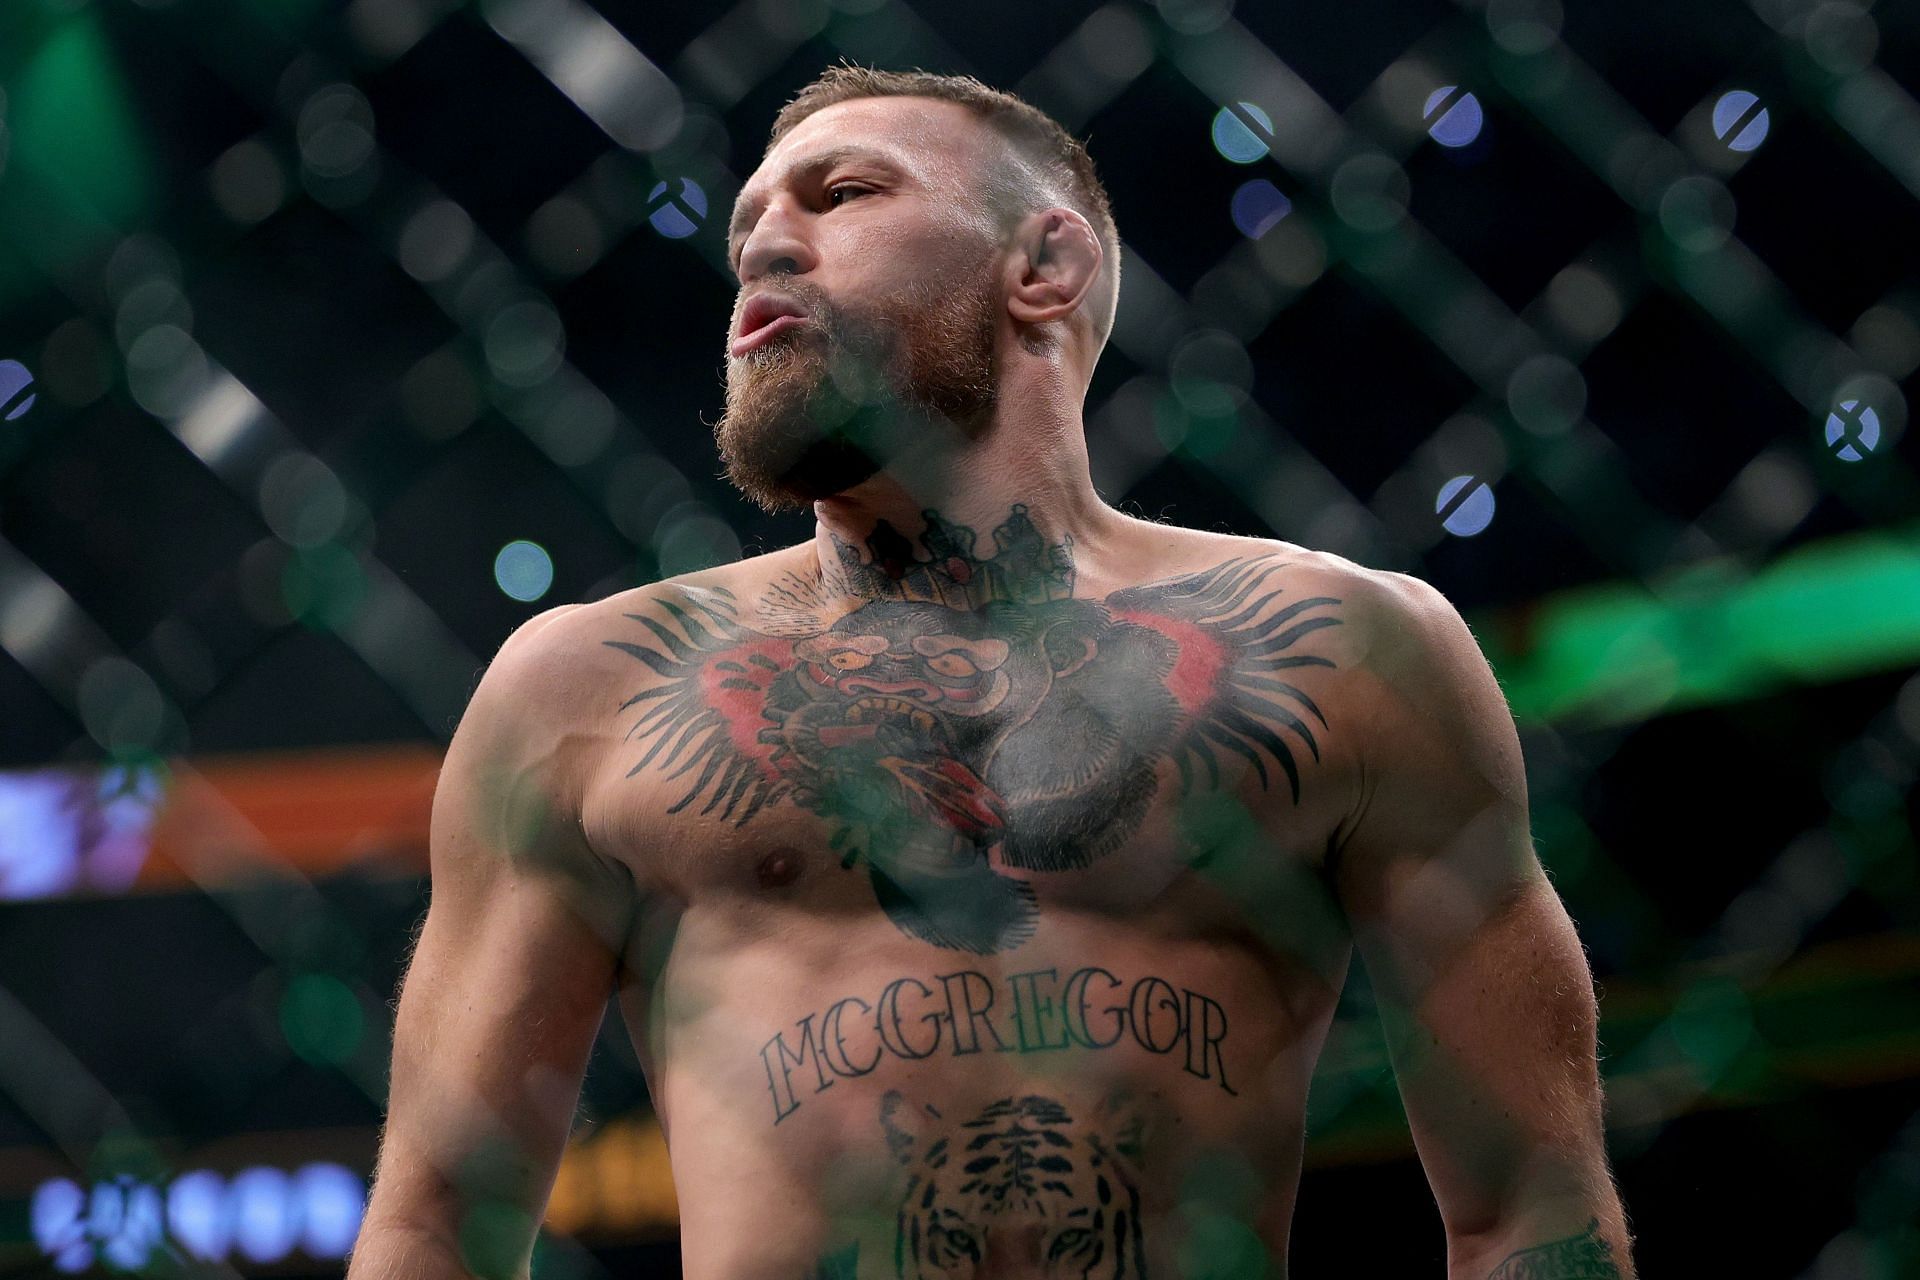 McGregor is currently ranked No.9 in the lightweight division